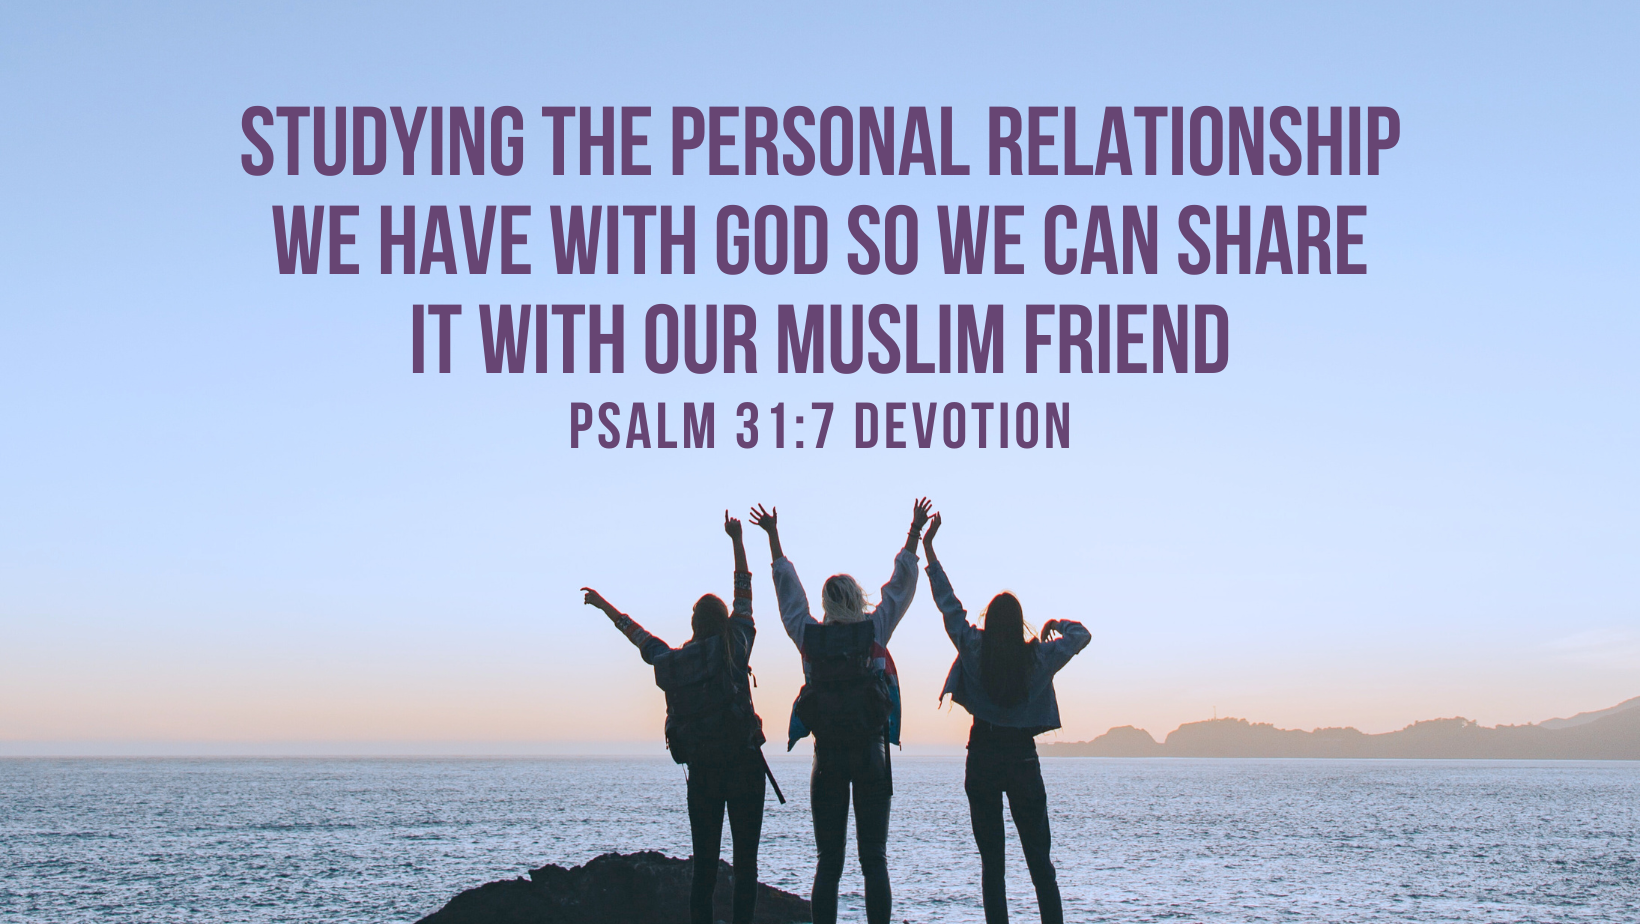 Studying the personal relationship we have with God so we can share it with our Muslim friend